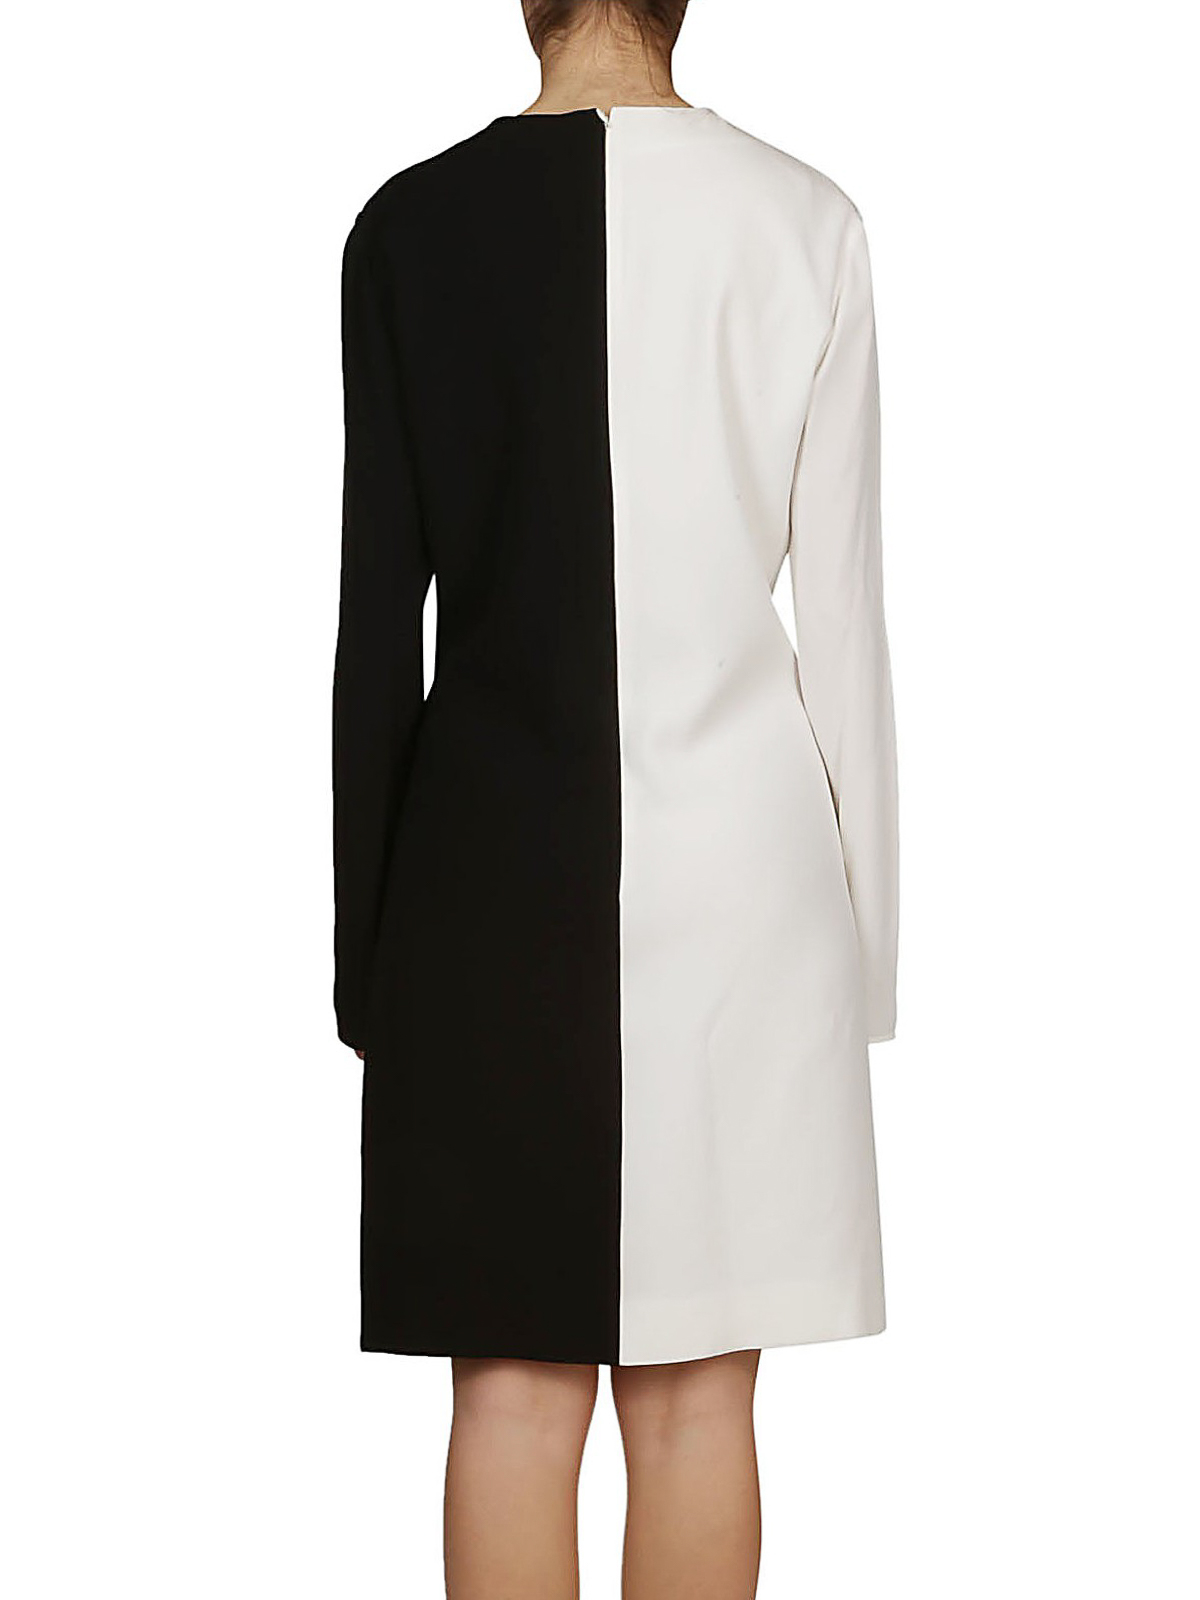 givenchy black and white dress